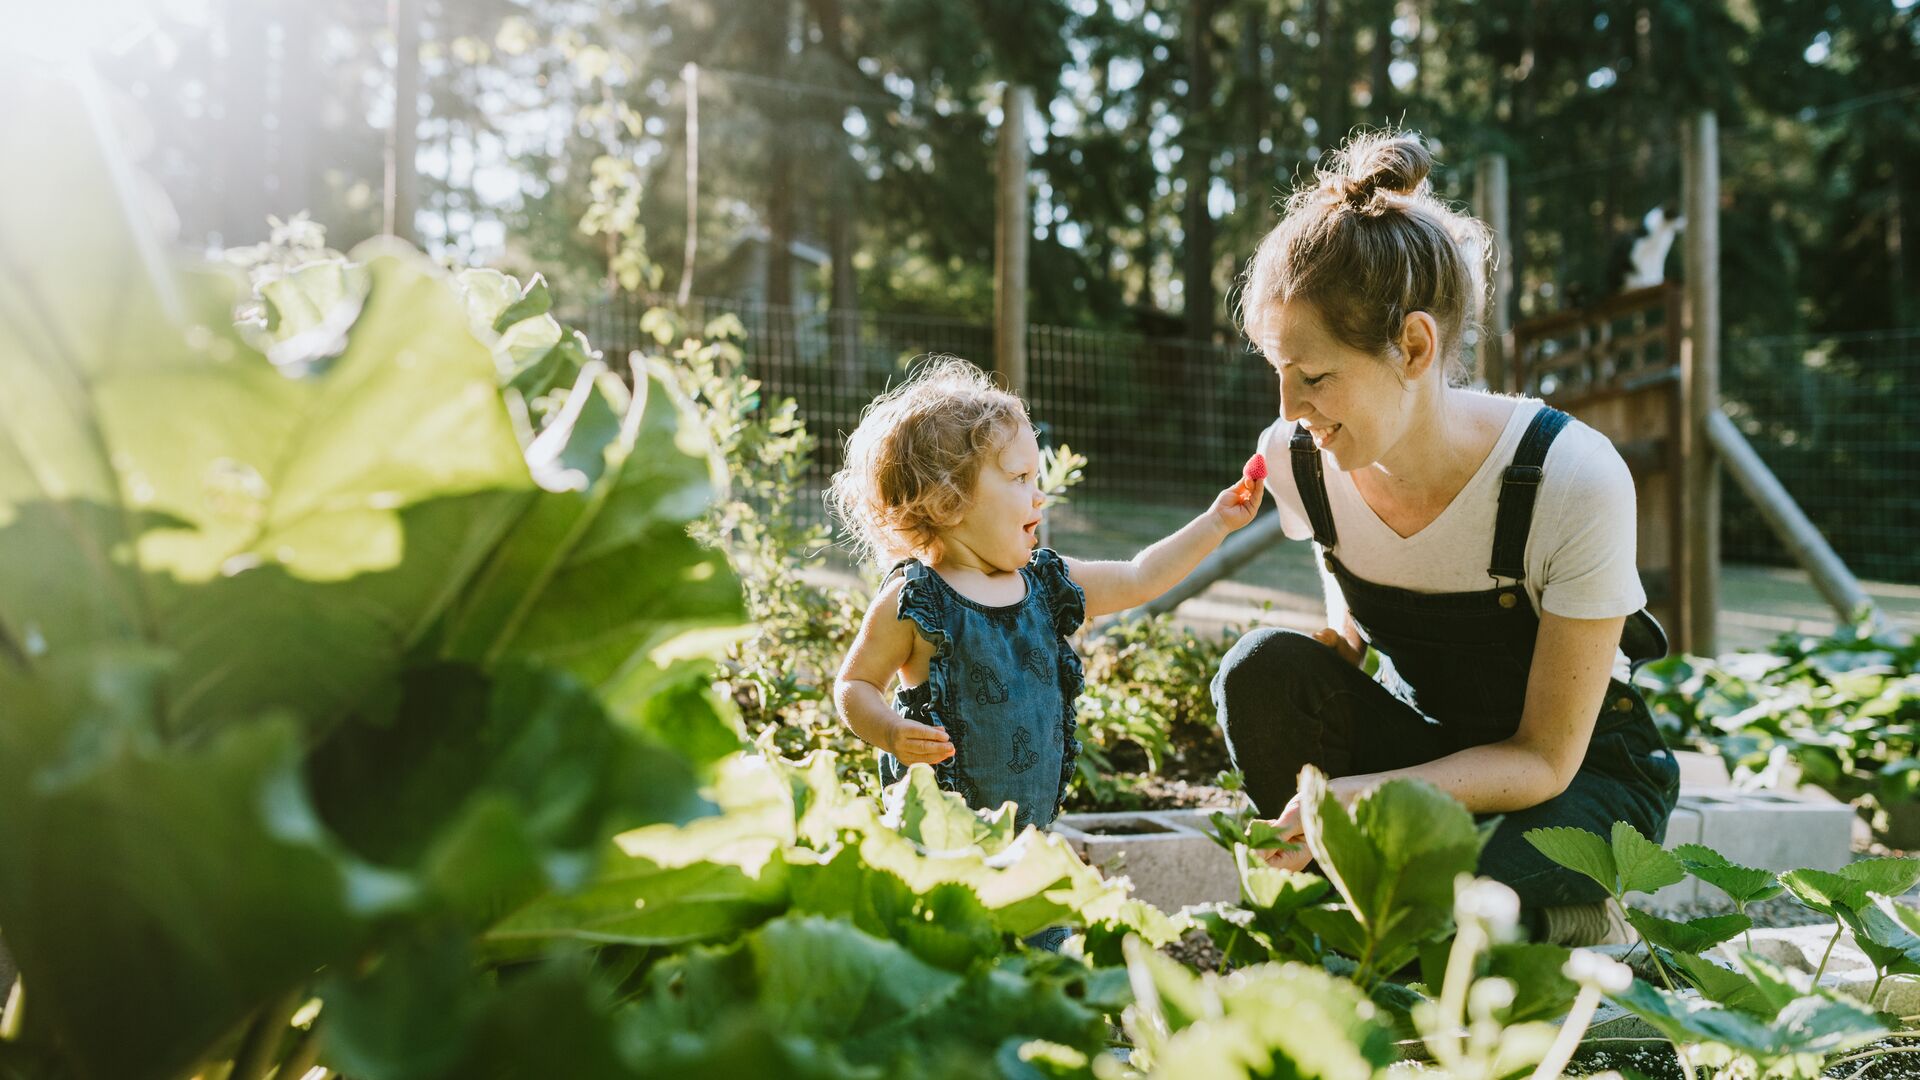 Woman and child gardening